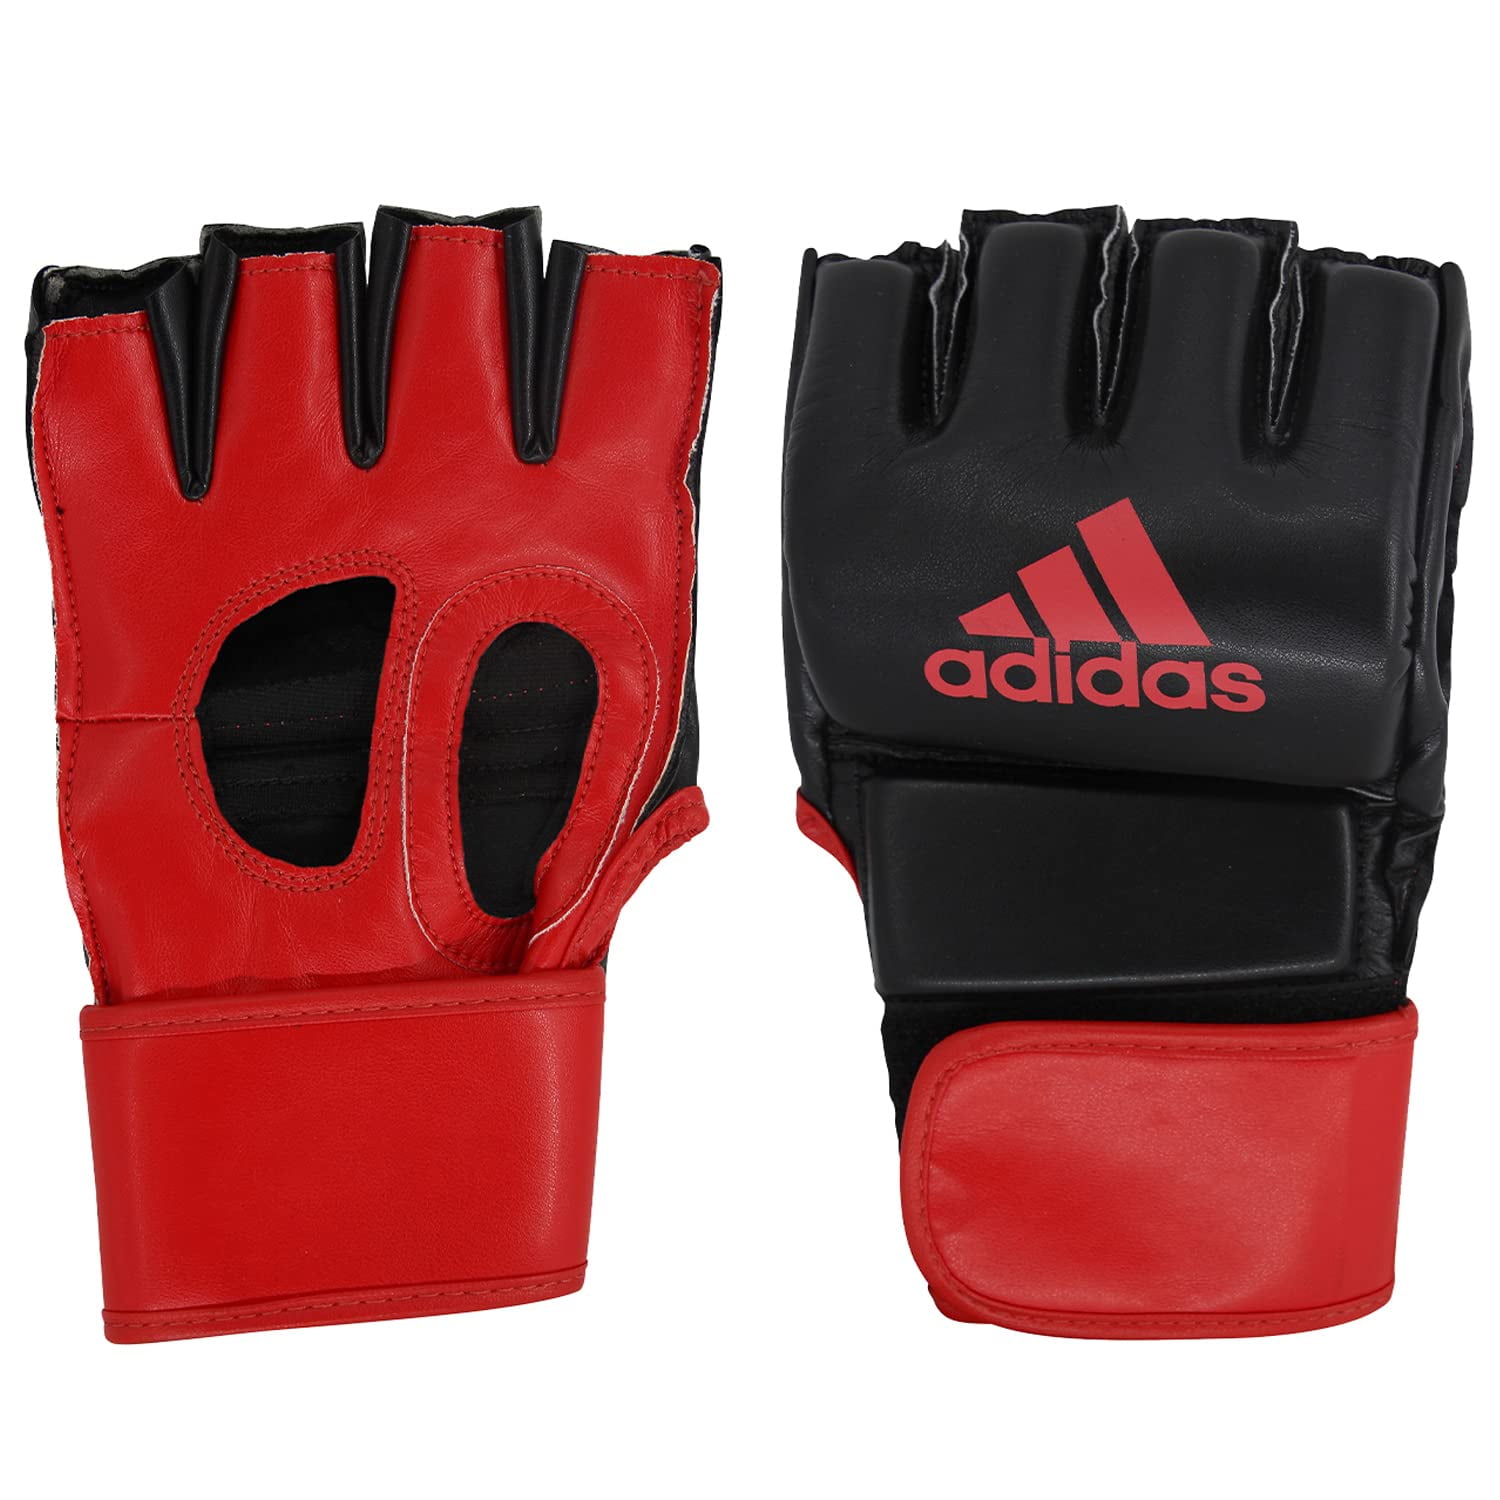 Small, Black/Chromium Men Red, Women, 4 & MMA for Gloves oz. Grappling Weight Gloves, Adidas